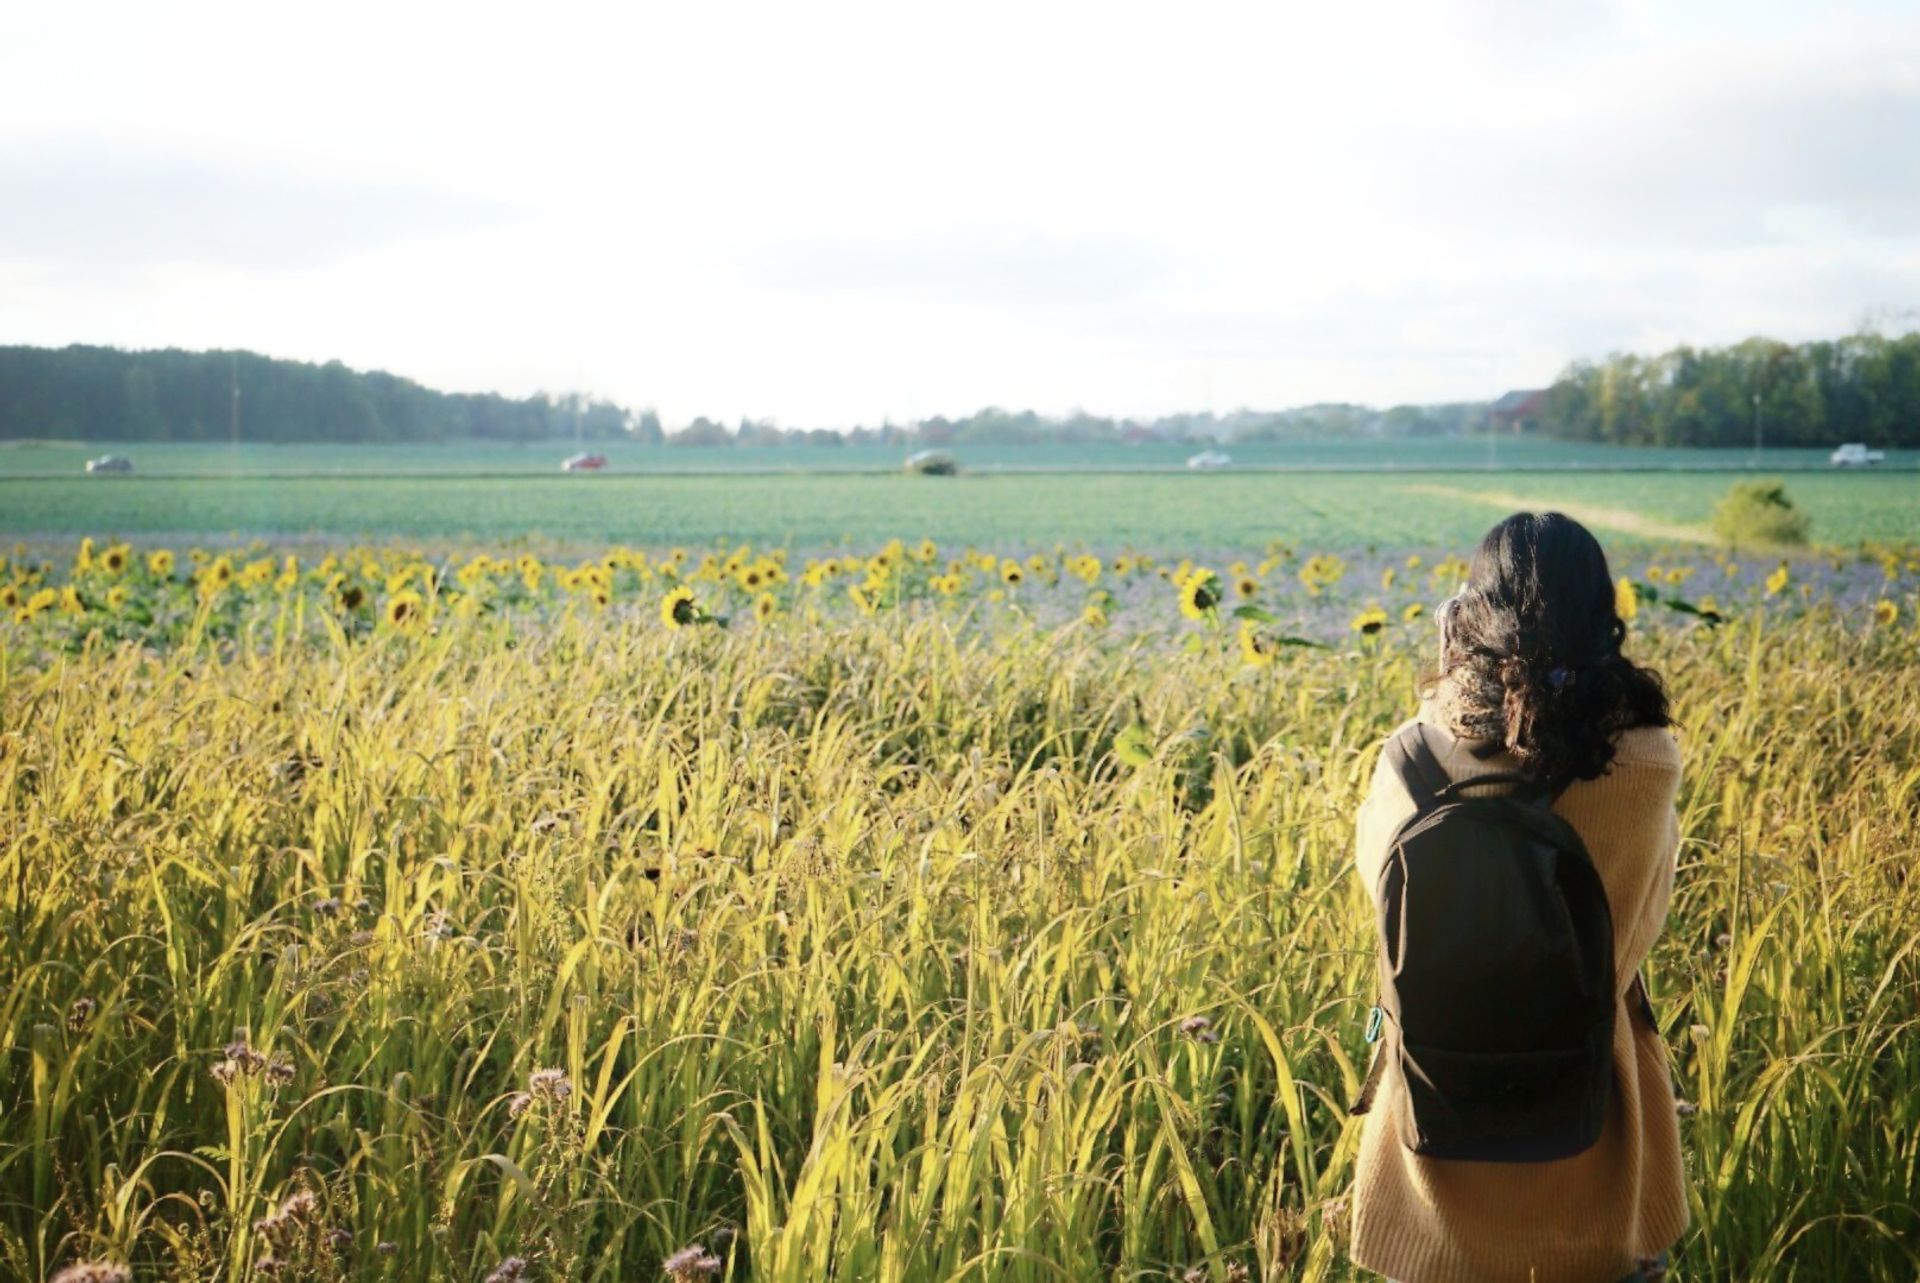 A woman from behind looks out at a meadow full of oats.